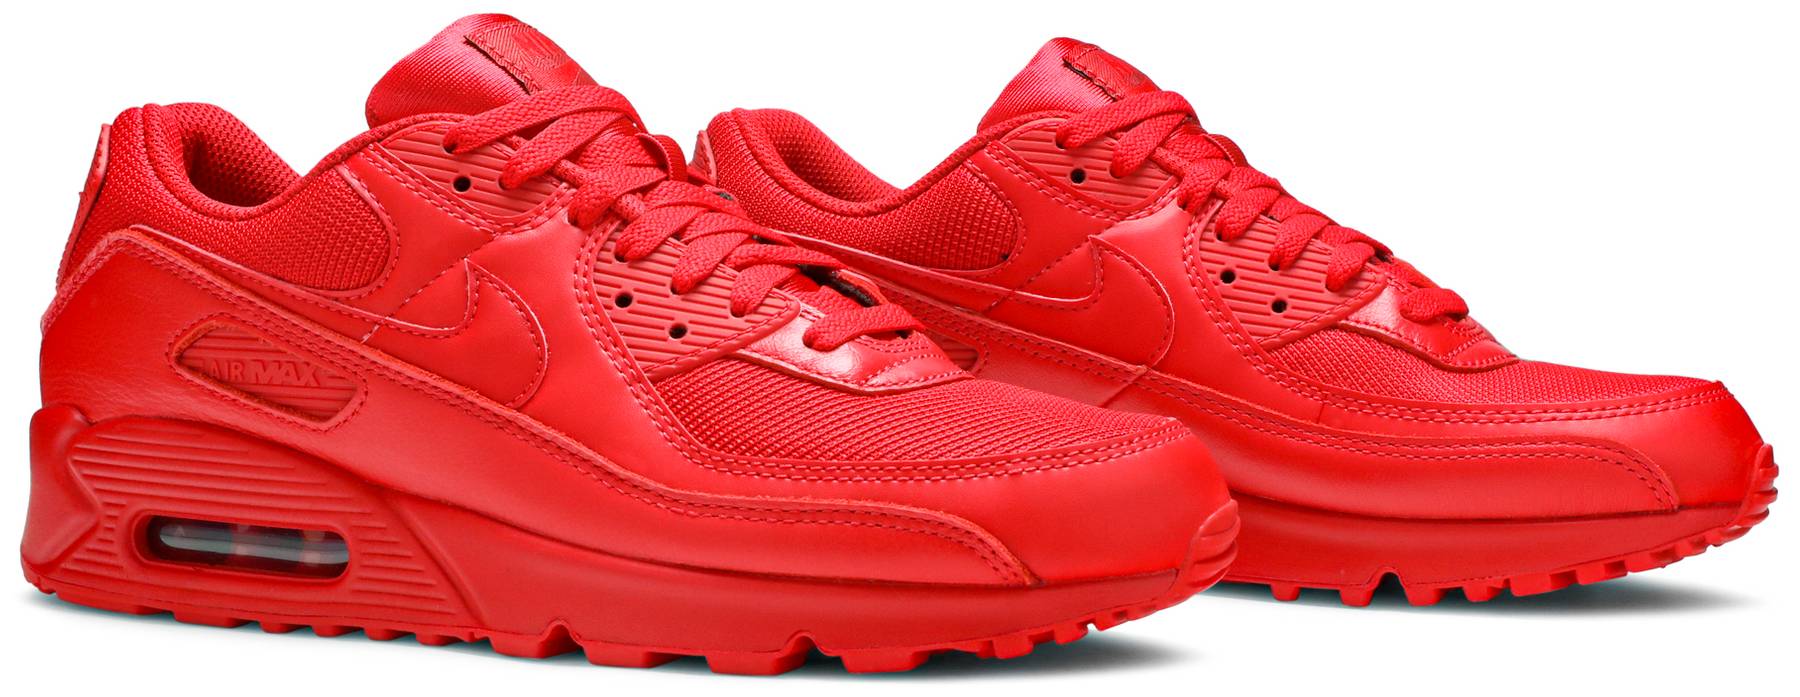 HONEST REVIEW OF THE NIKE AIR MAX '90 TRIPLE RED!! AIR MAX '90 TRIPLE RED  REVIEW & ON FEET IN 4K!! 